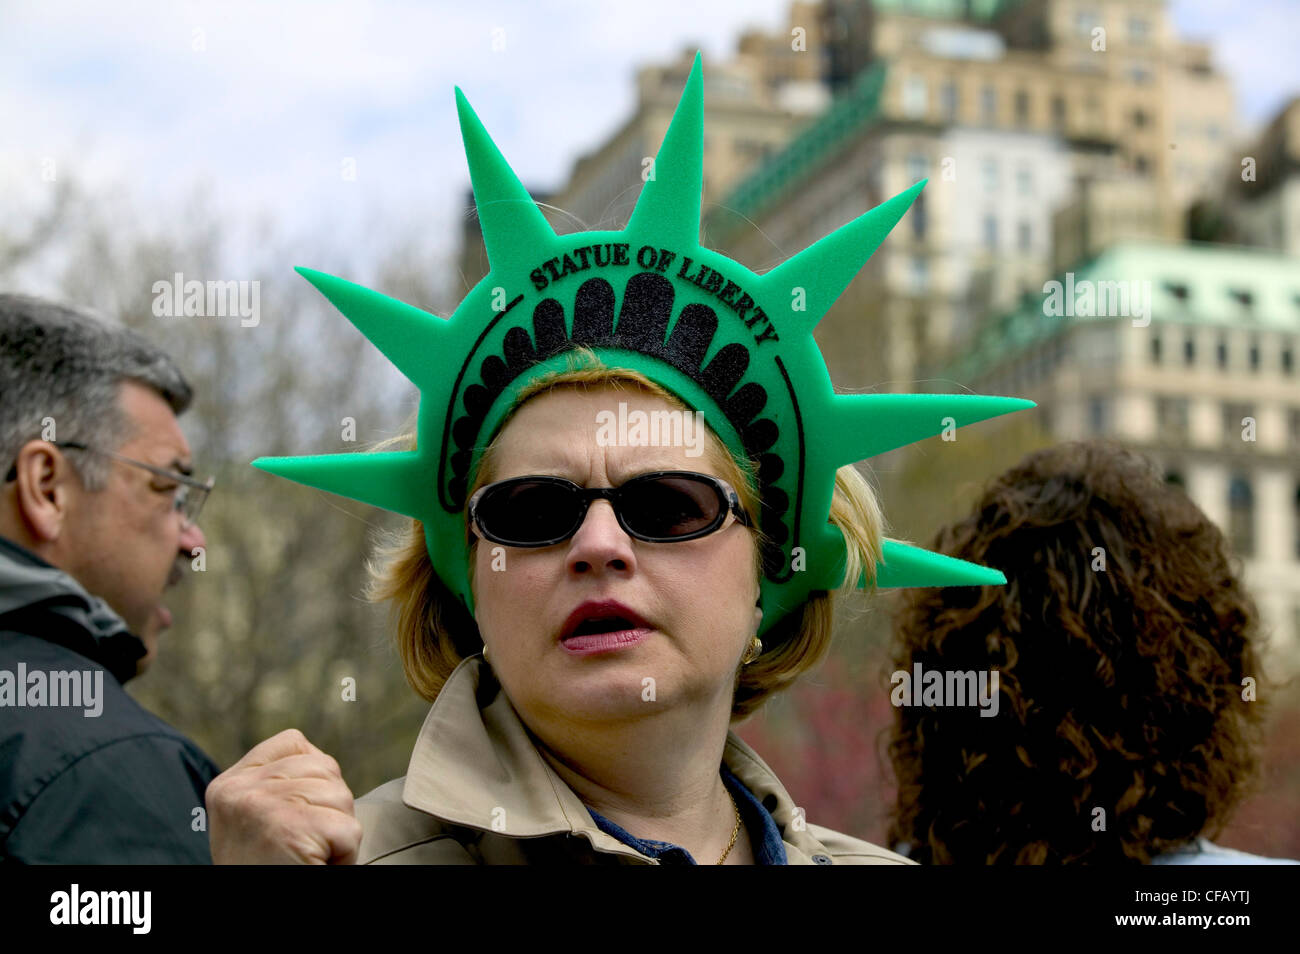 A woman wears a Statue of Liberty head band, New York City, USA. Stock Photo